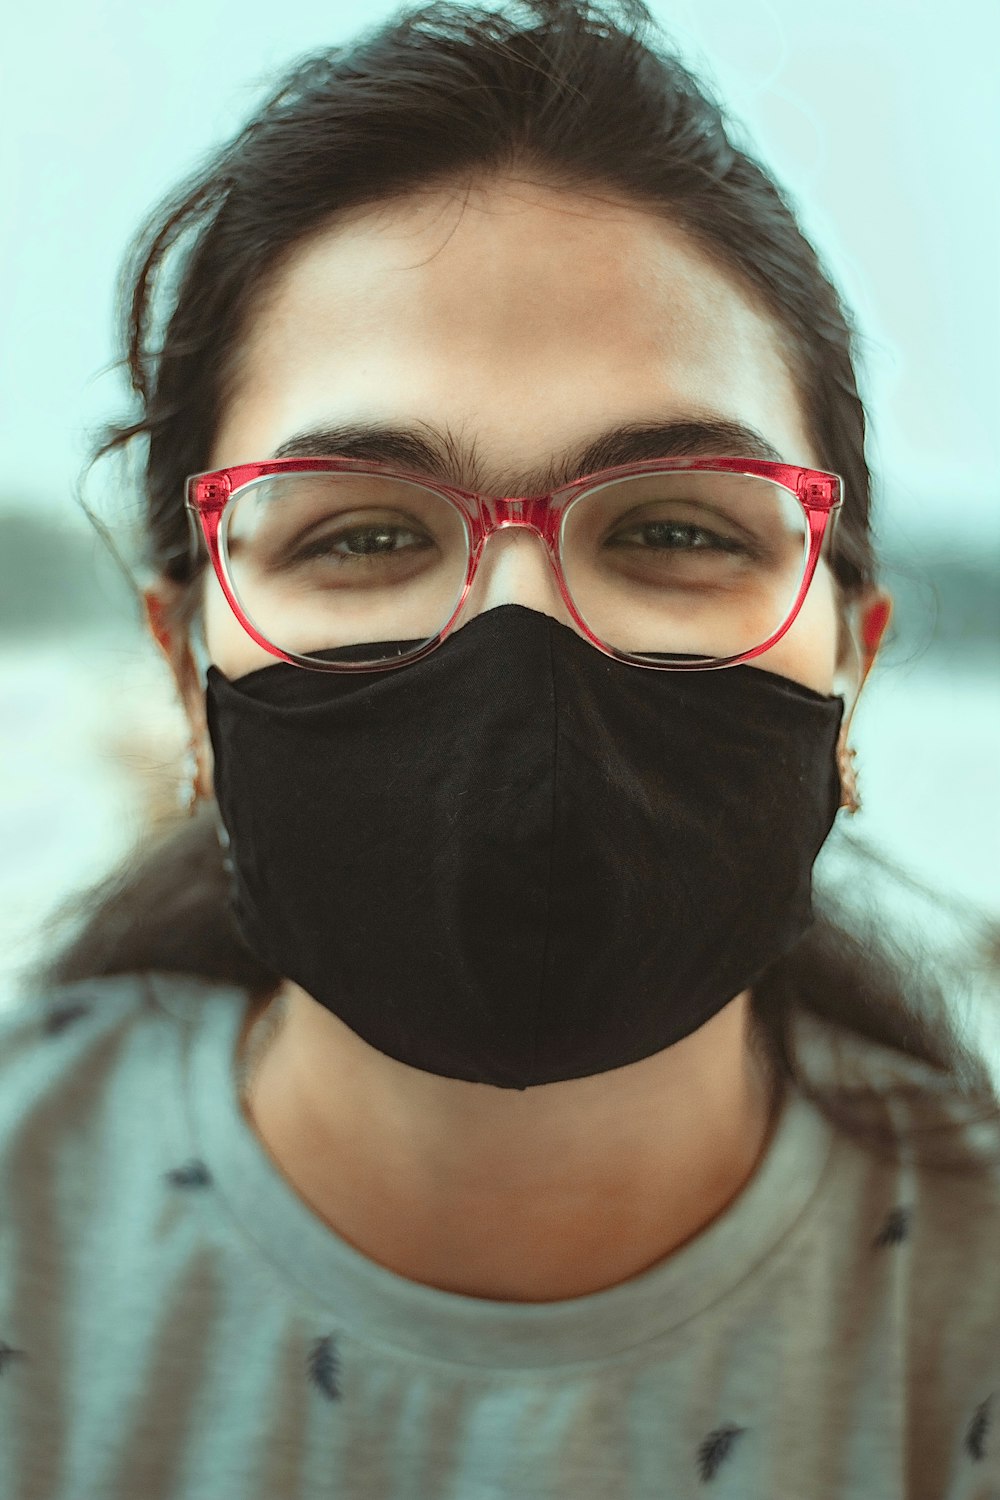 woman in red framed eyeglasses covering her face with black scarf